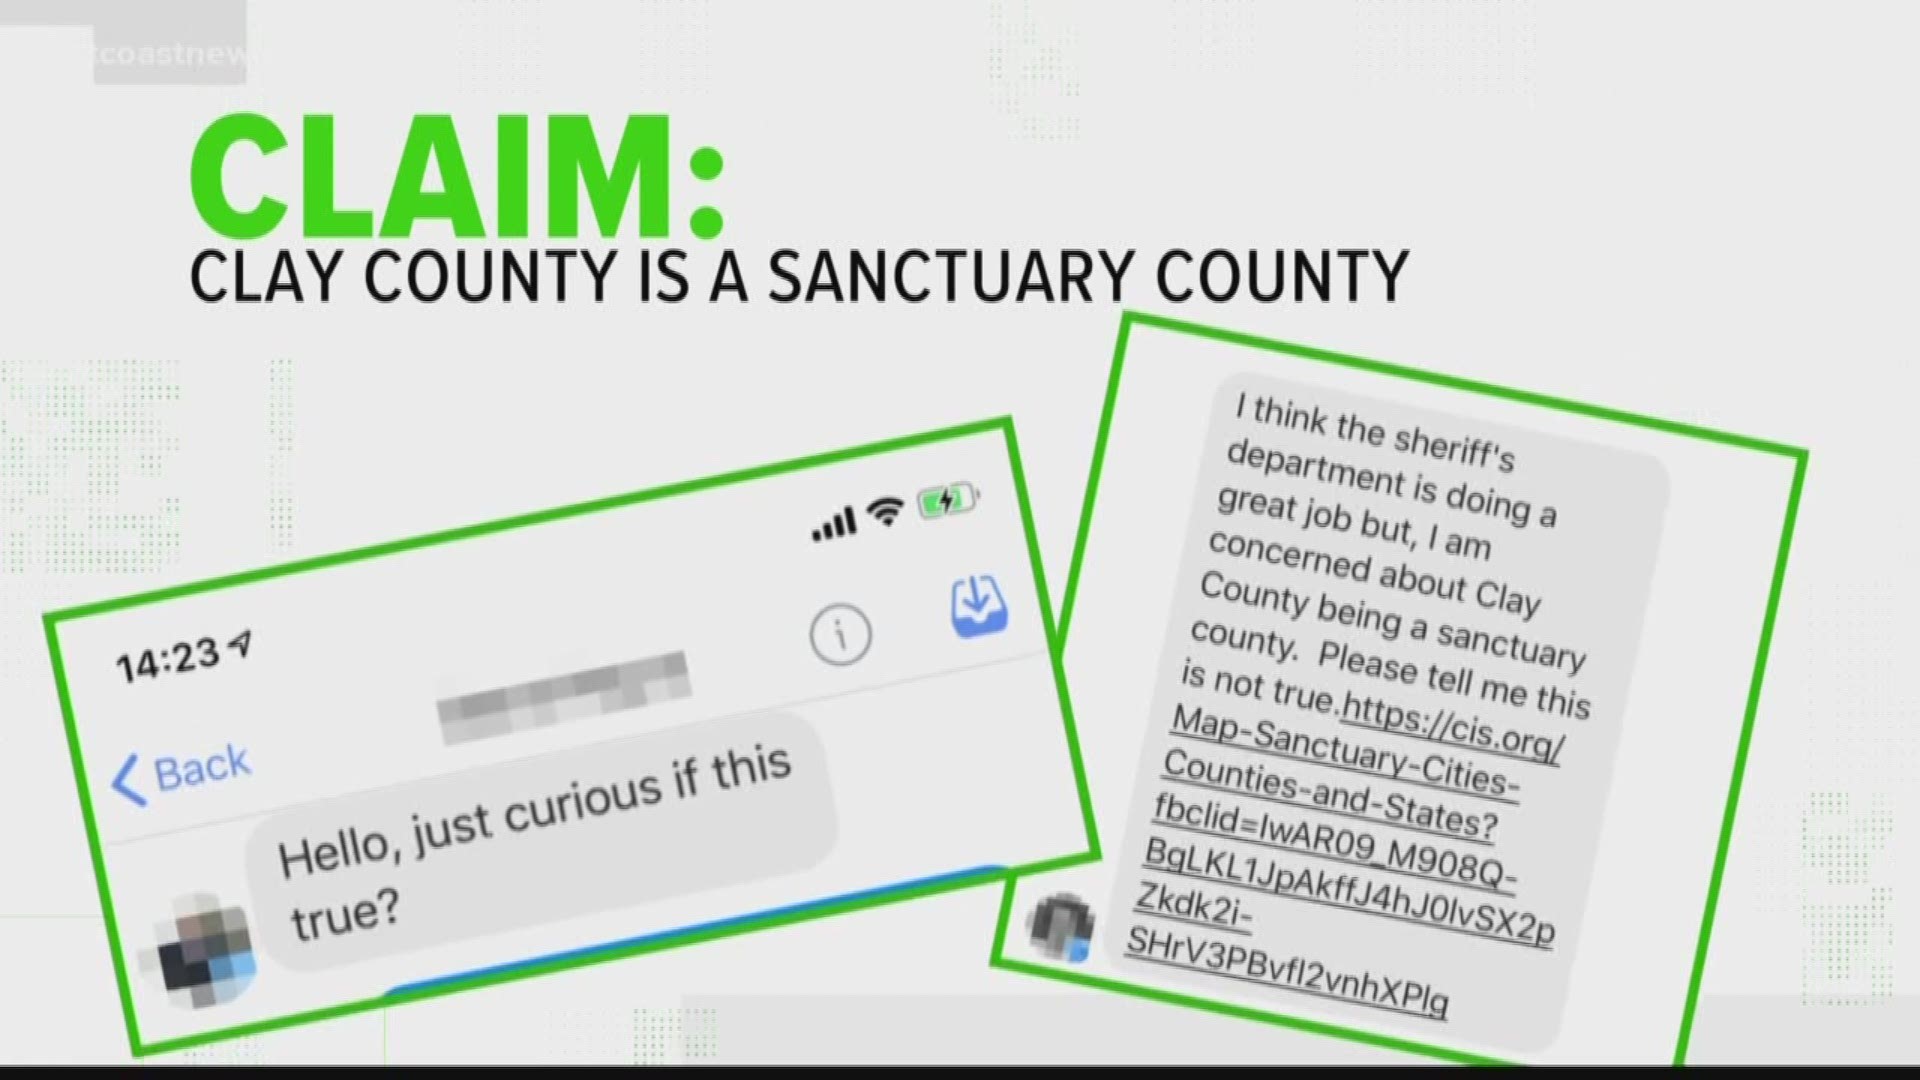 The sheriff's office was contacted by residents saying there was a claim going around that said Clay County was a sanctuary county.